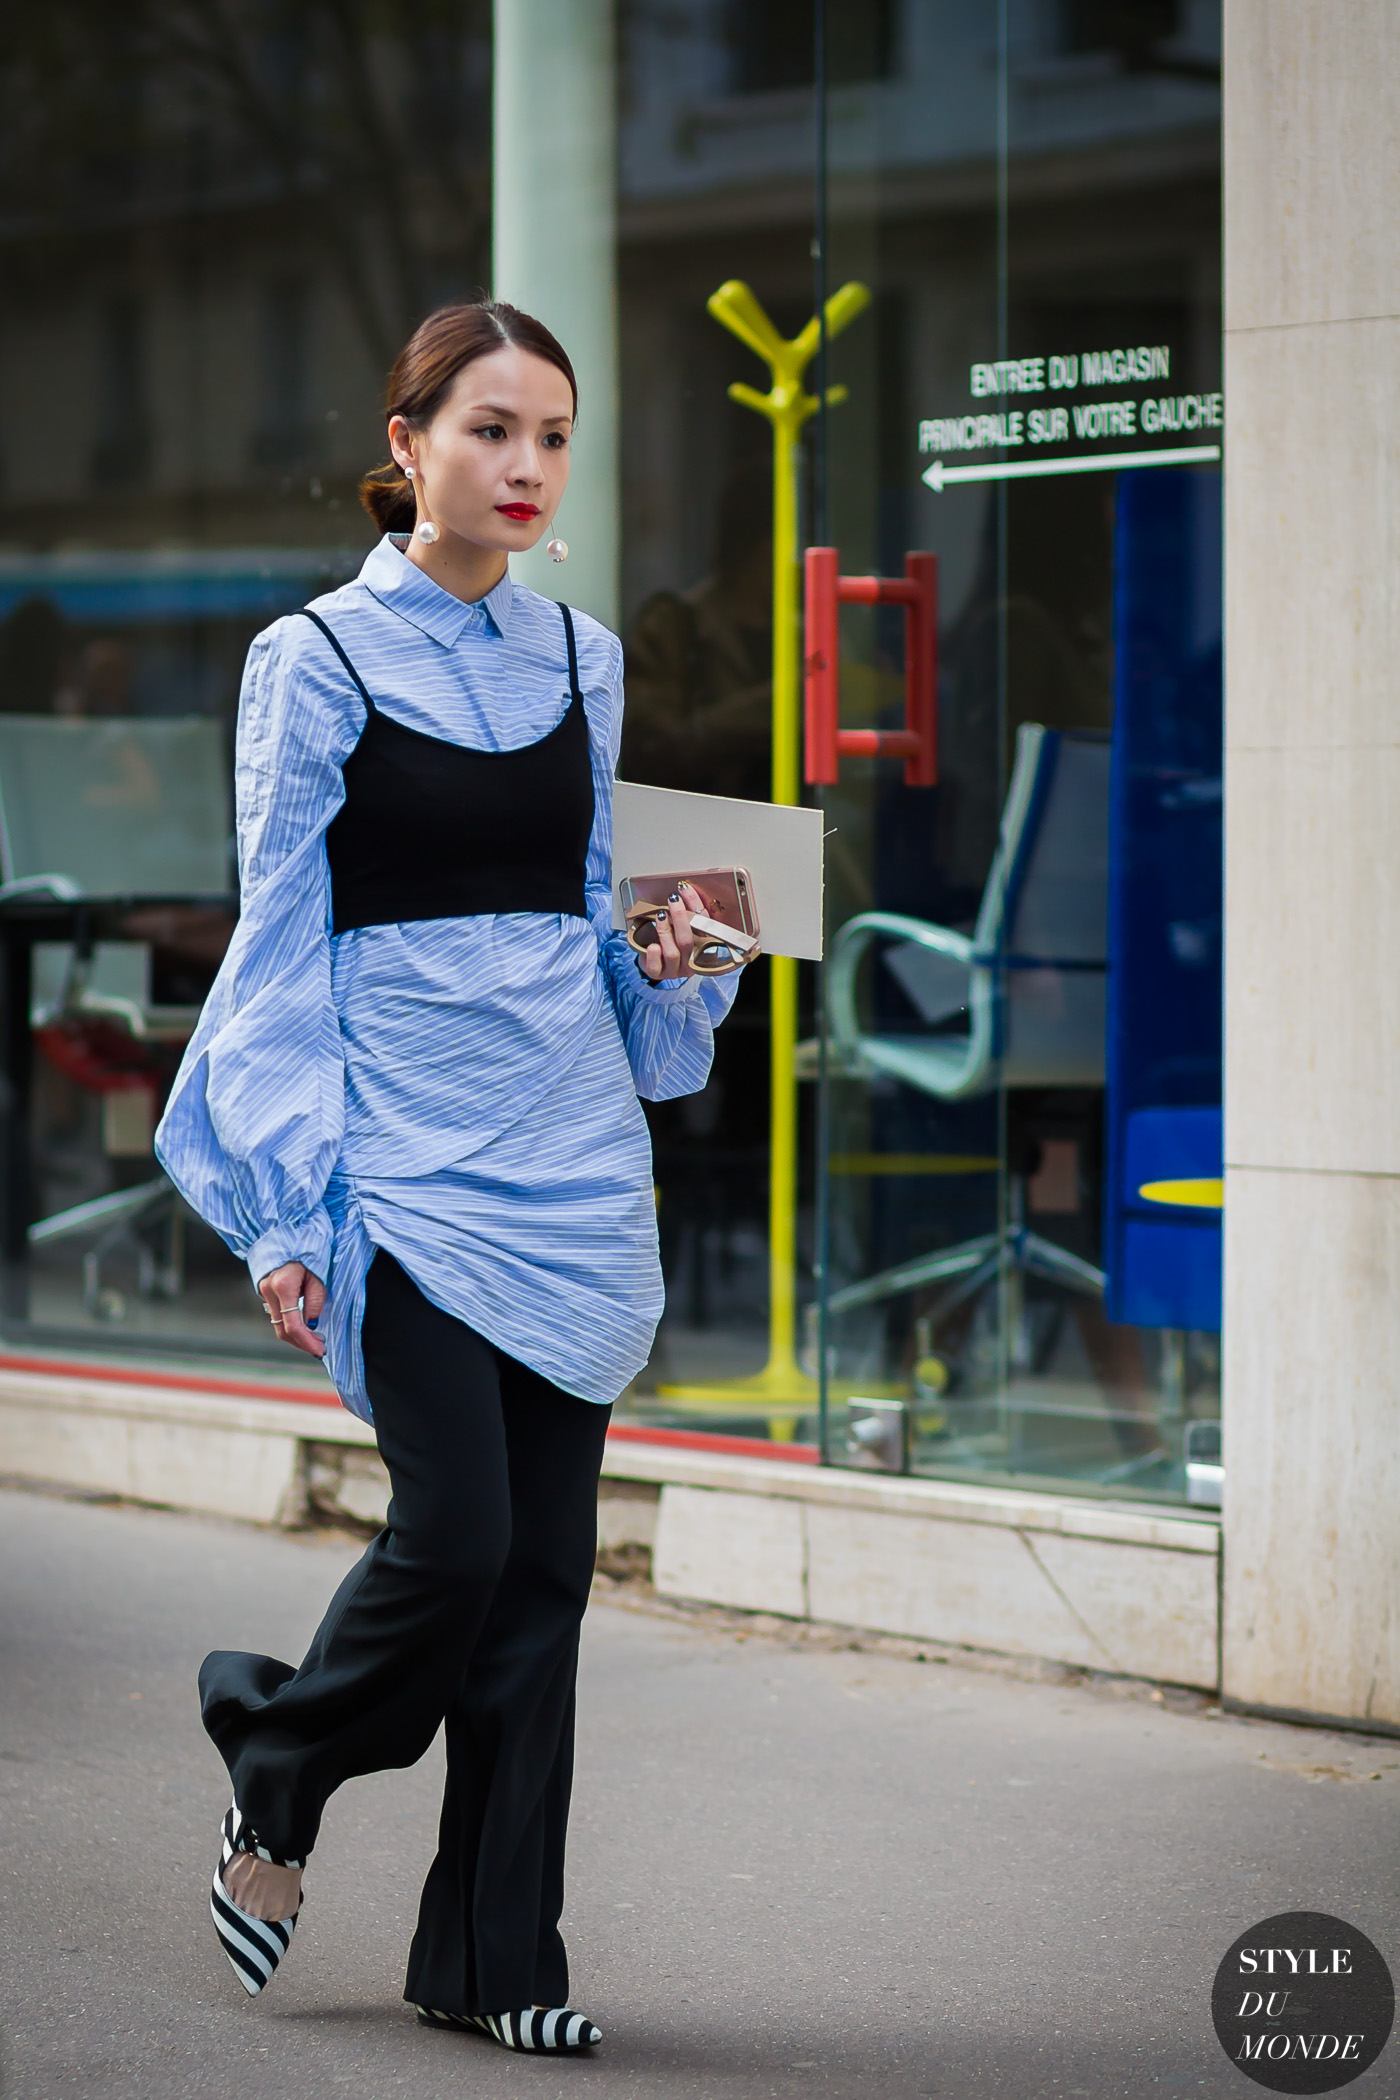 tracey-cheng-by-styledumonde-street-style-fashion-photography